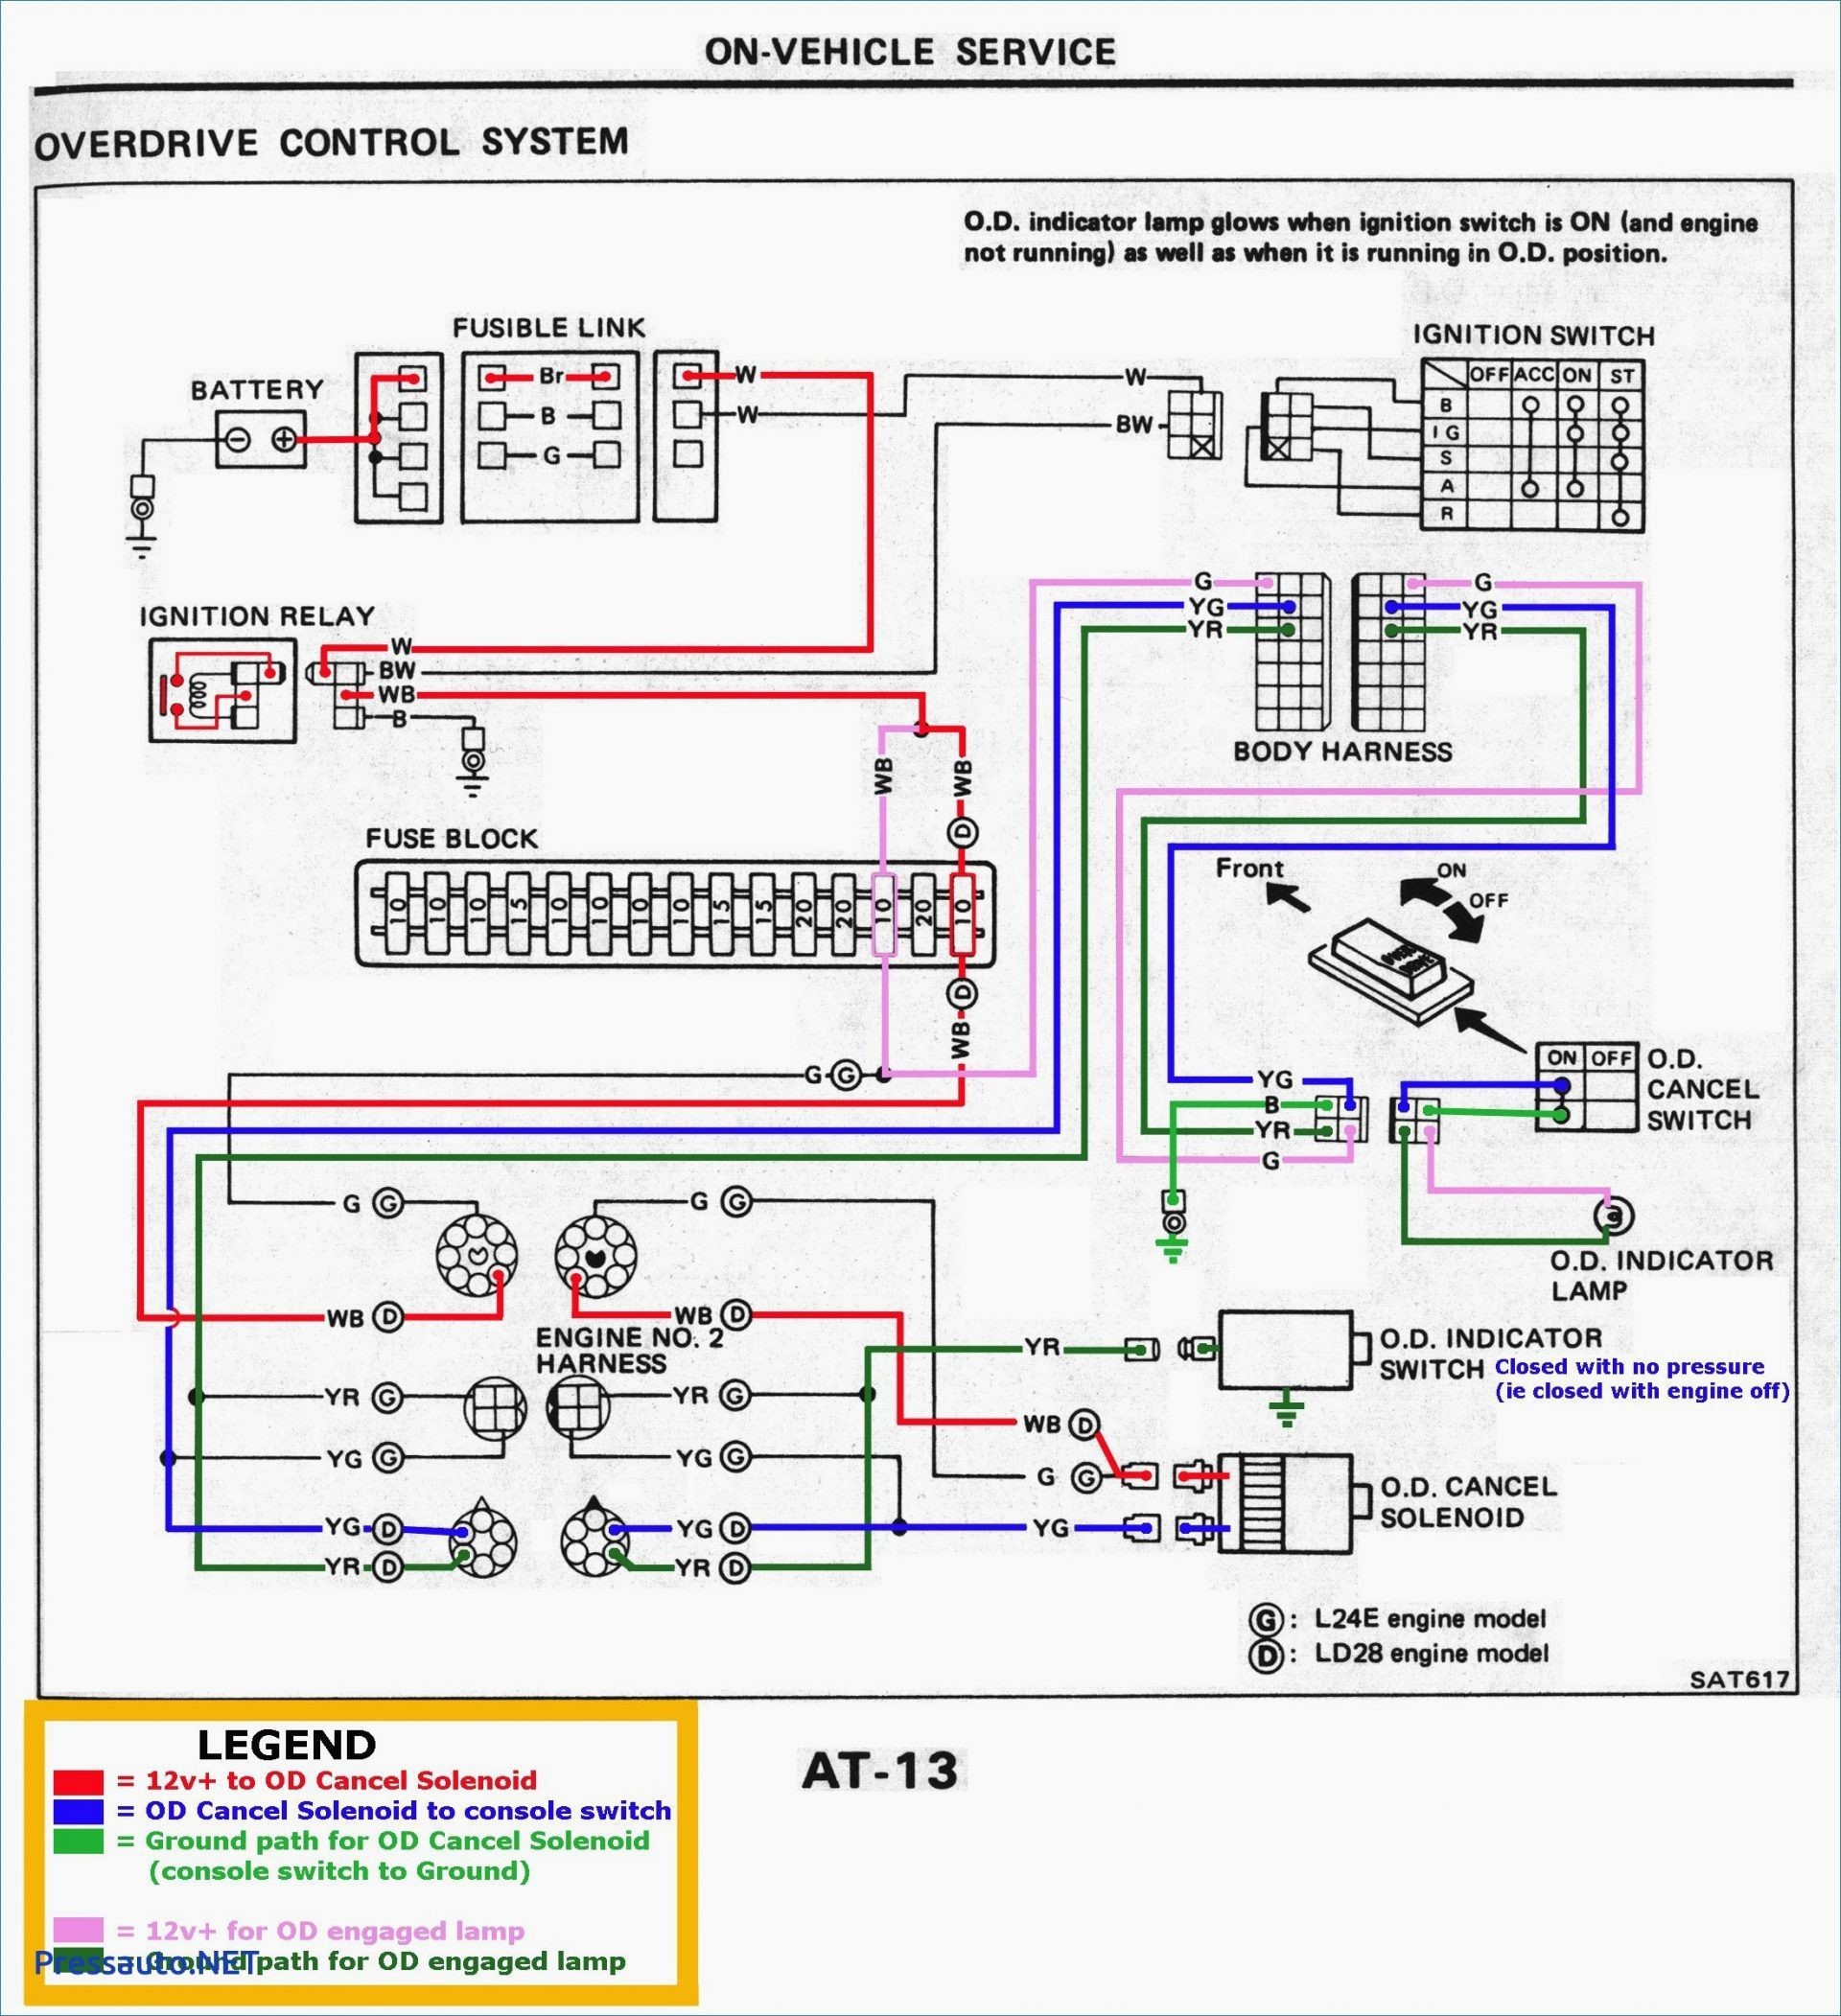 off back light wiring enthusiast wiring diagrams u2022 rh rasalibre co Light Switch Wiring Diagram Wiring a Light Fixture